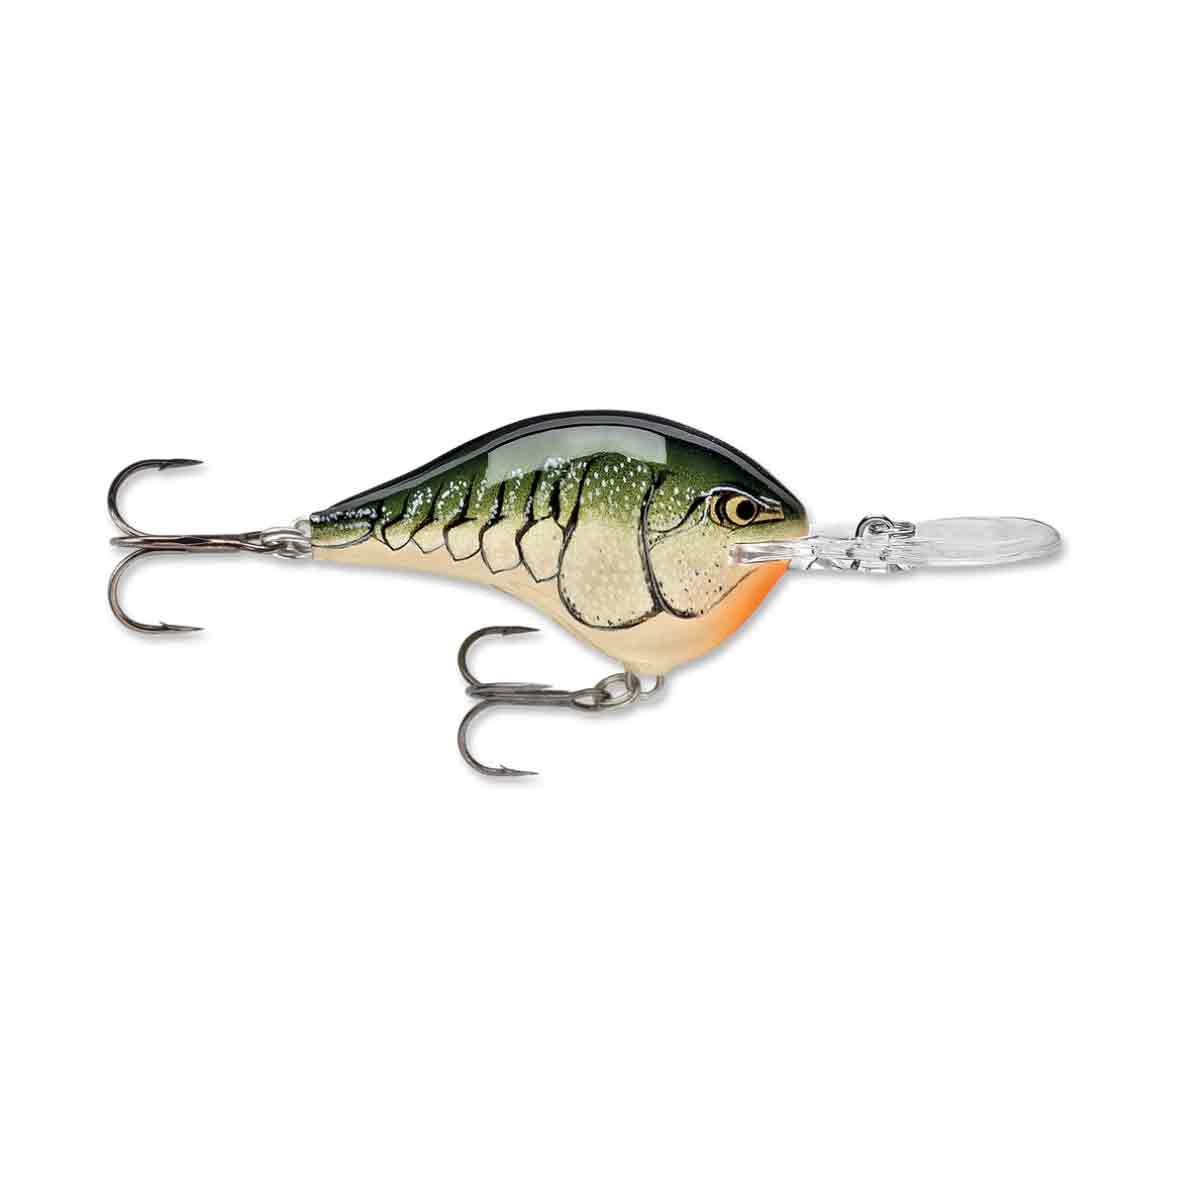 Dives-To_Olive Green Craw